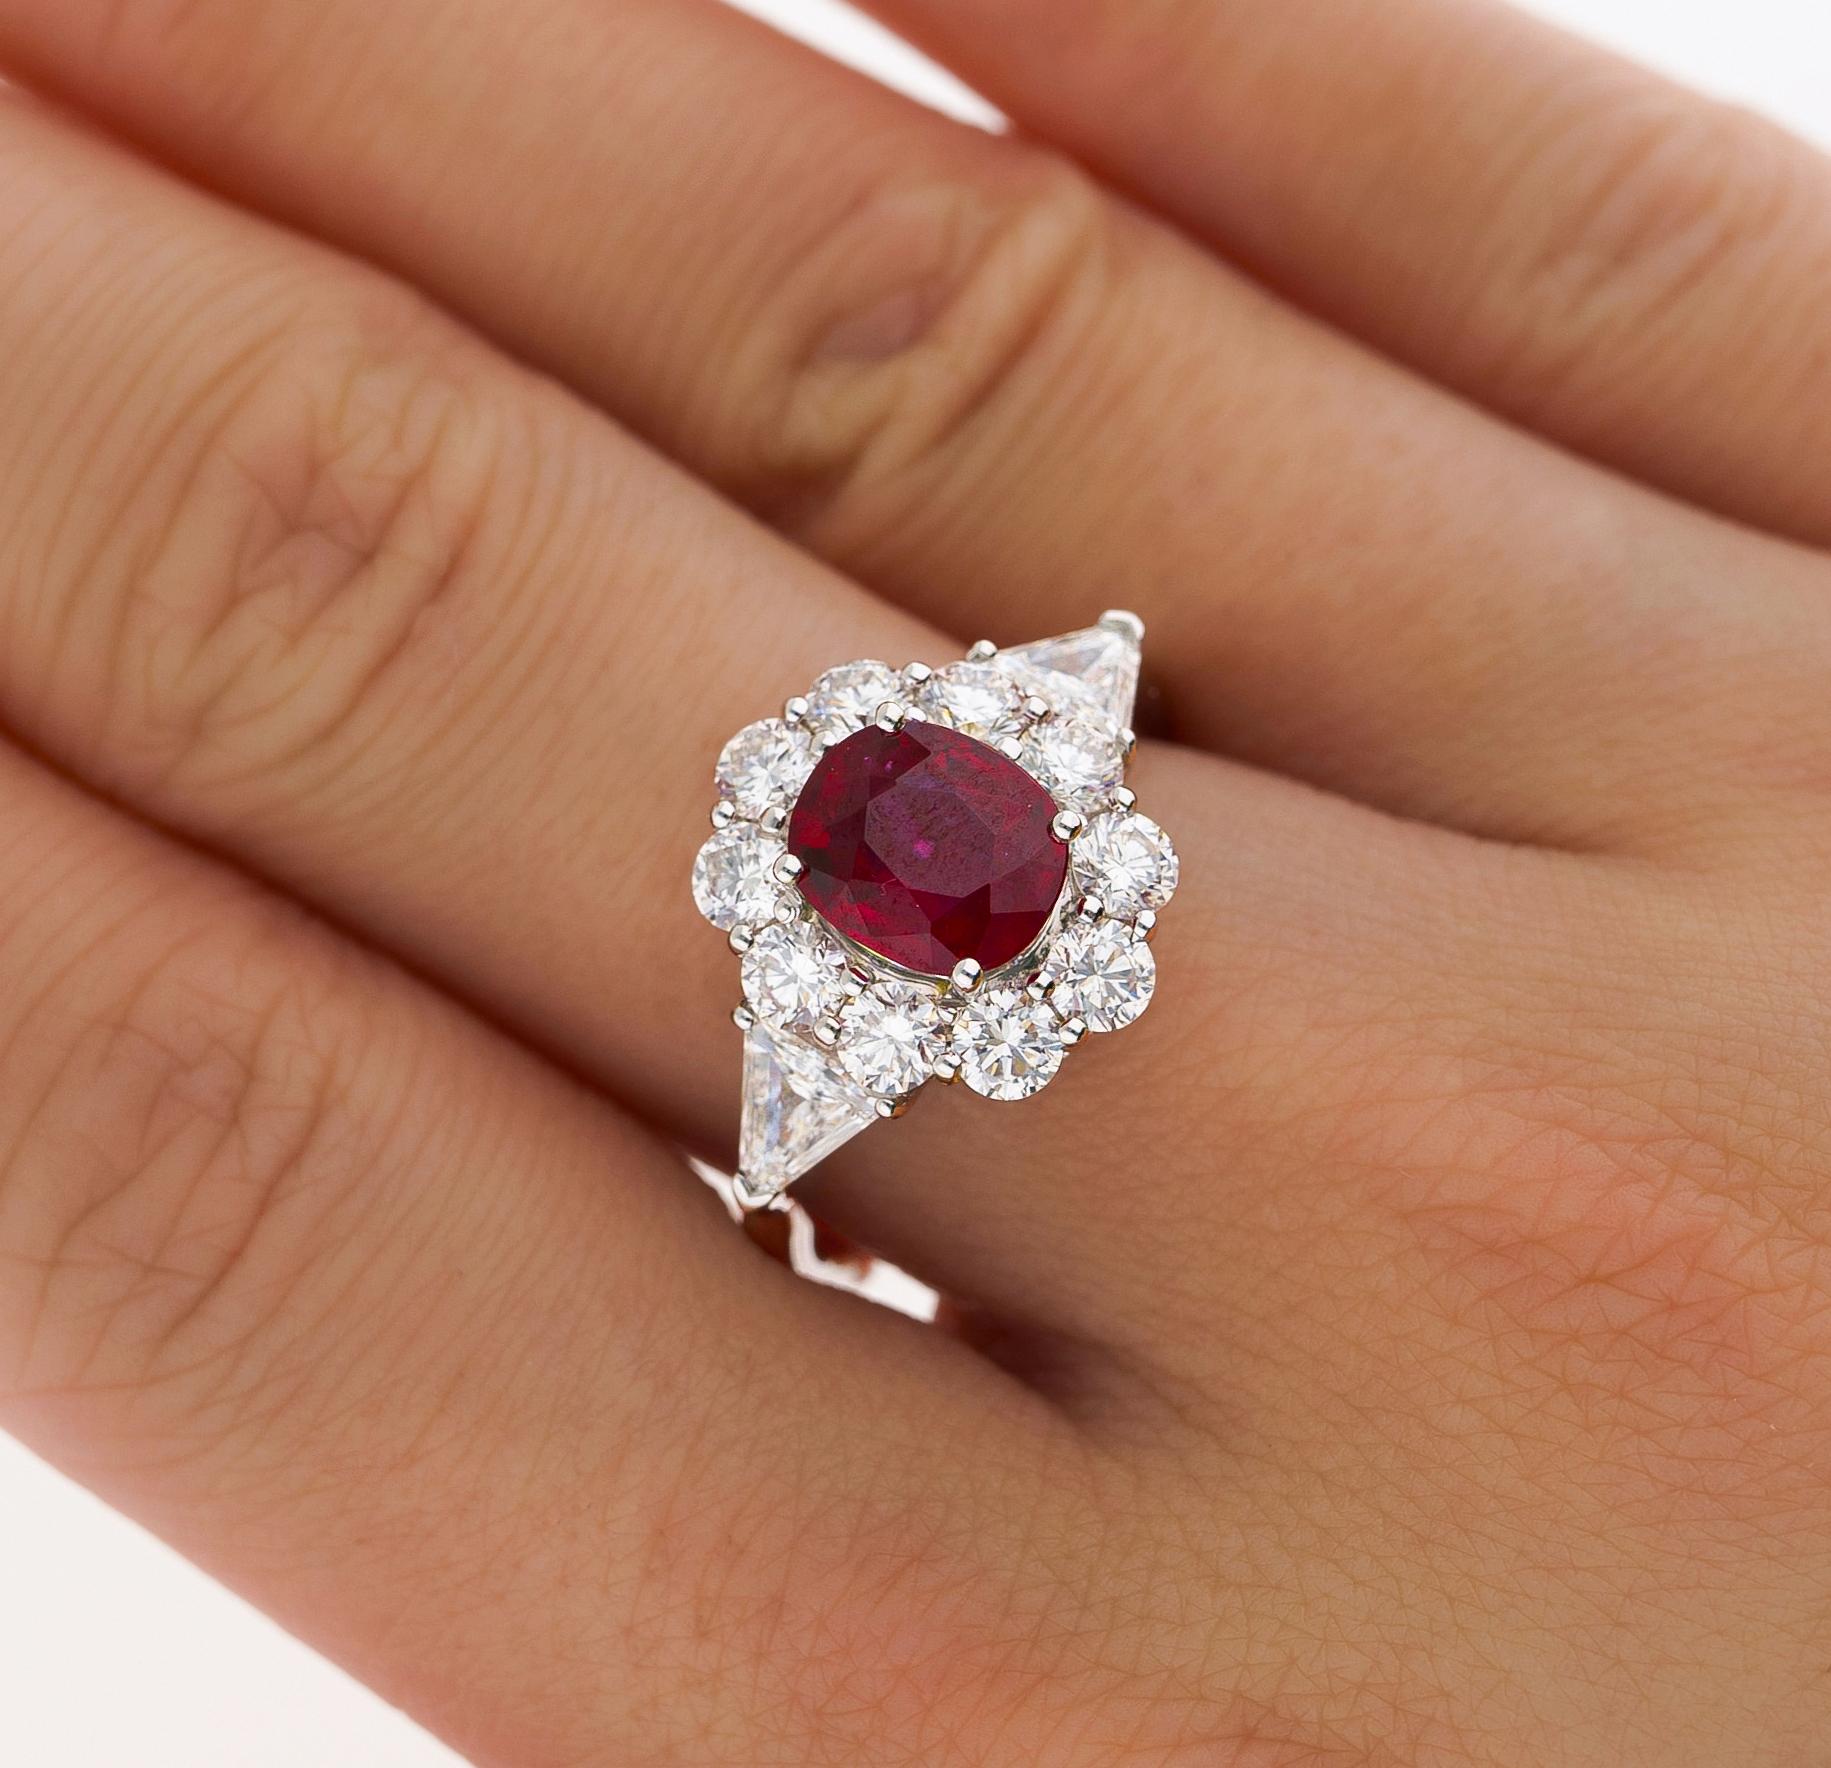 Women's AGL Certified 1.76 Carat Pigeon's Blood Red No Heat CLASSIC Burma Ruby Ring For Sale